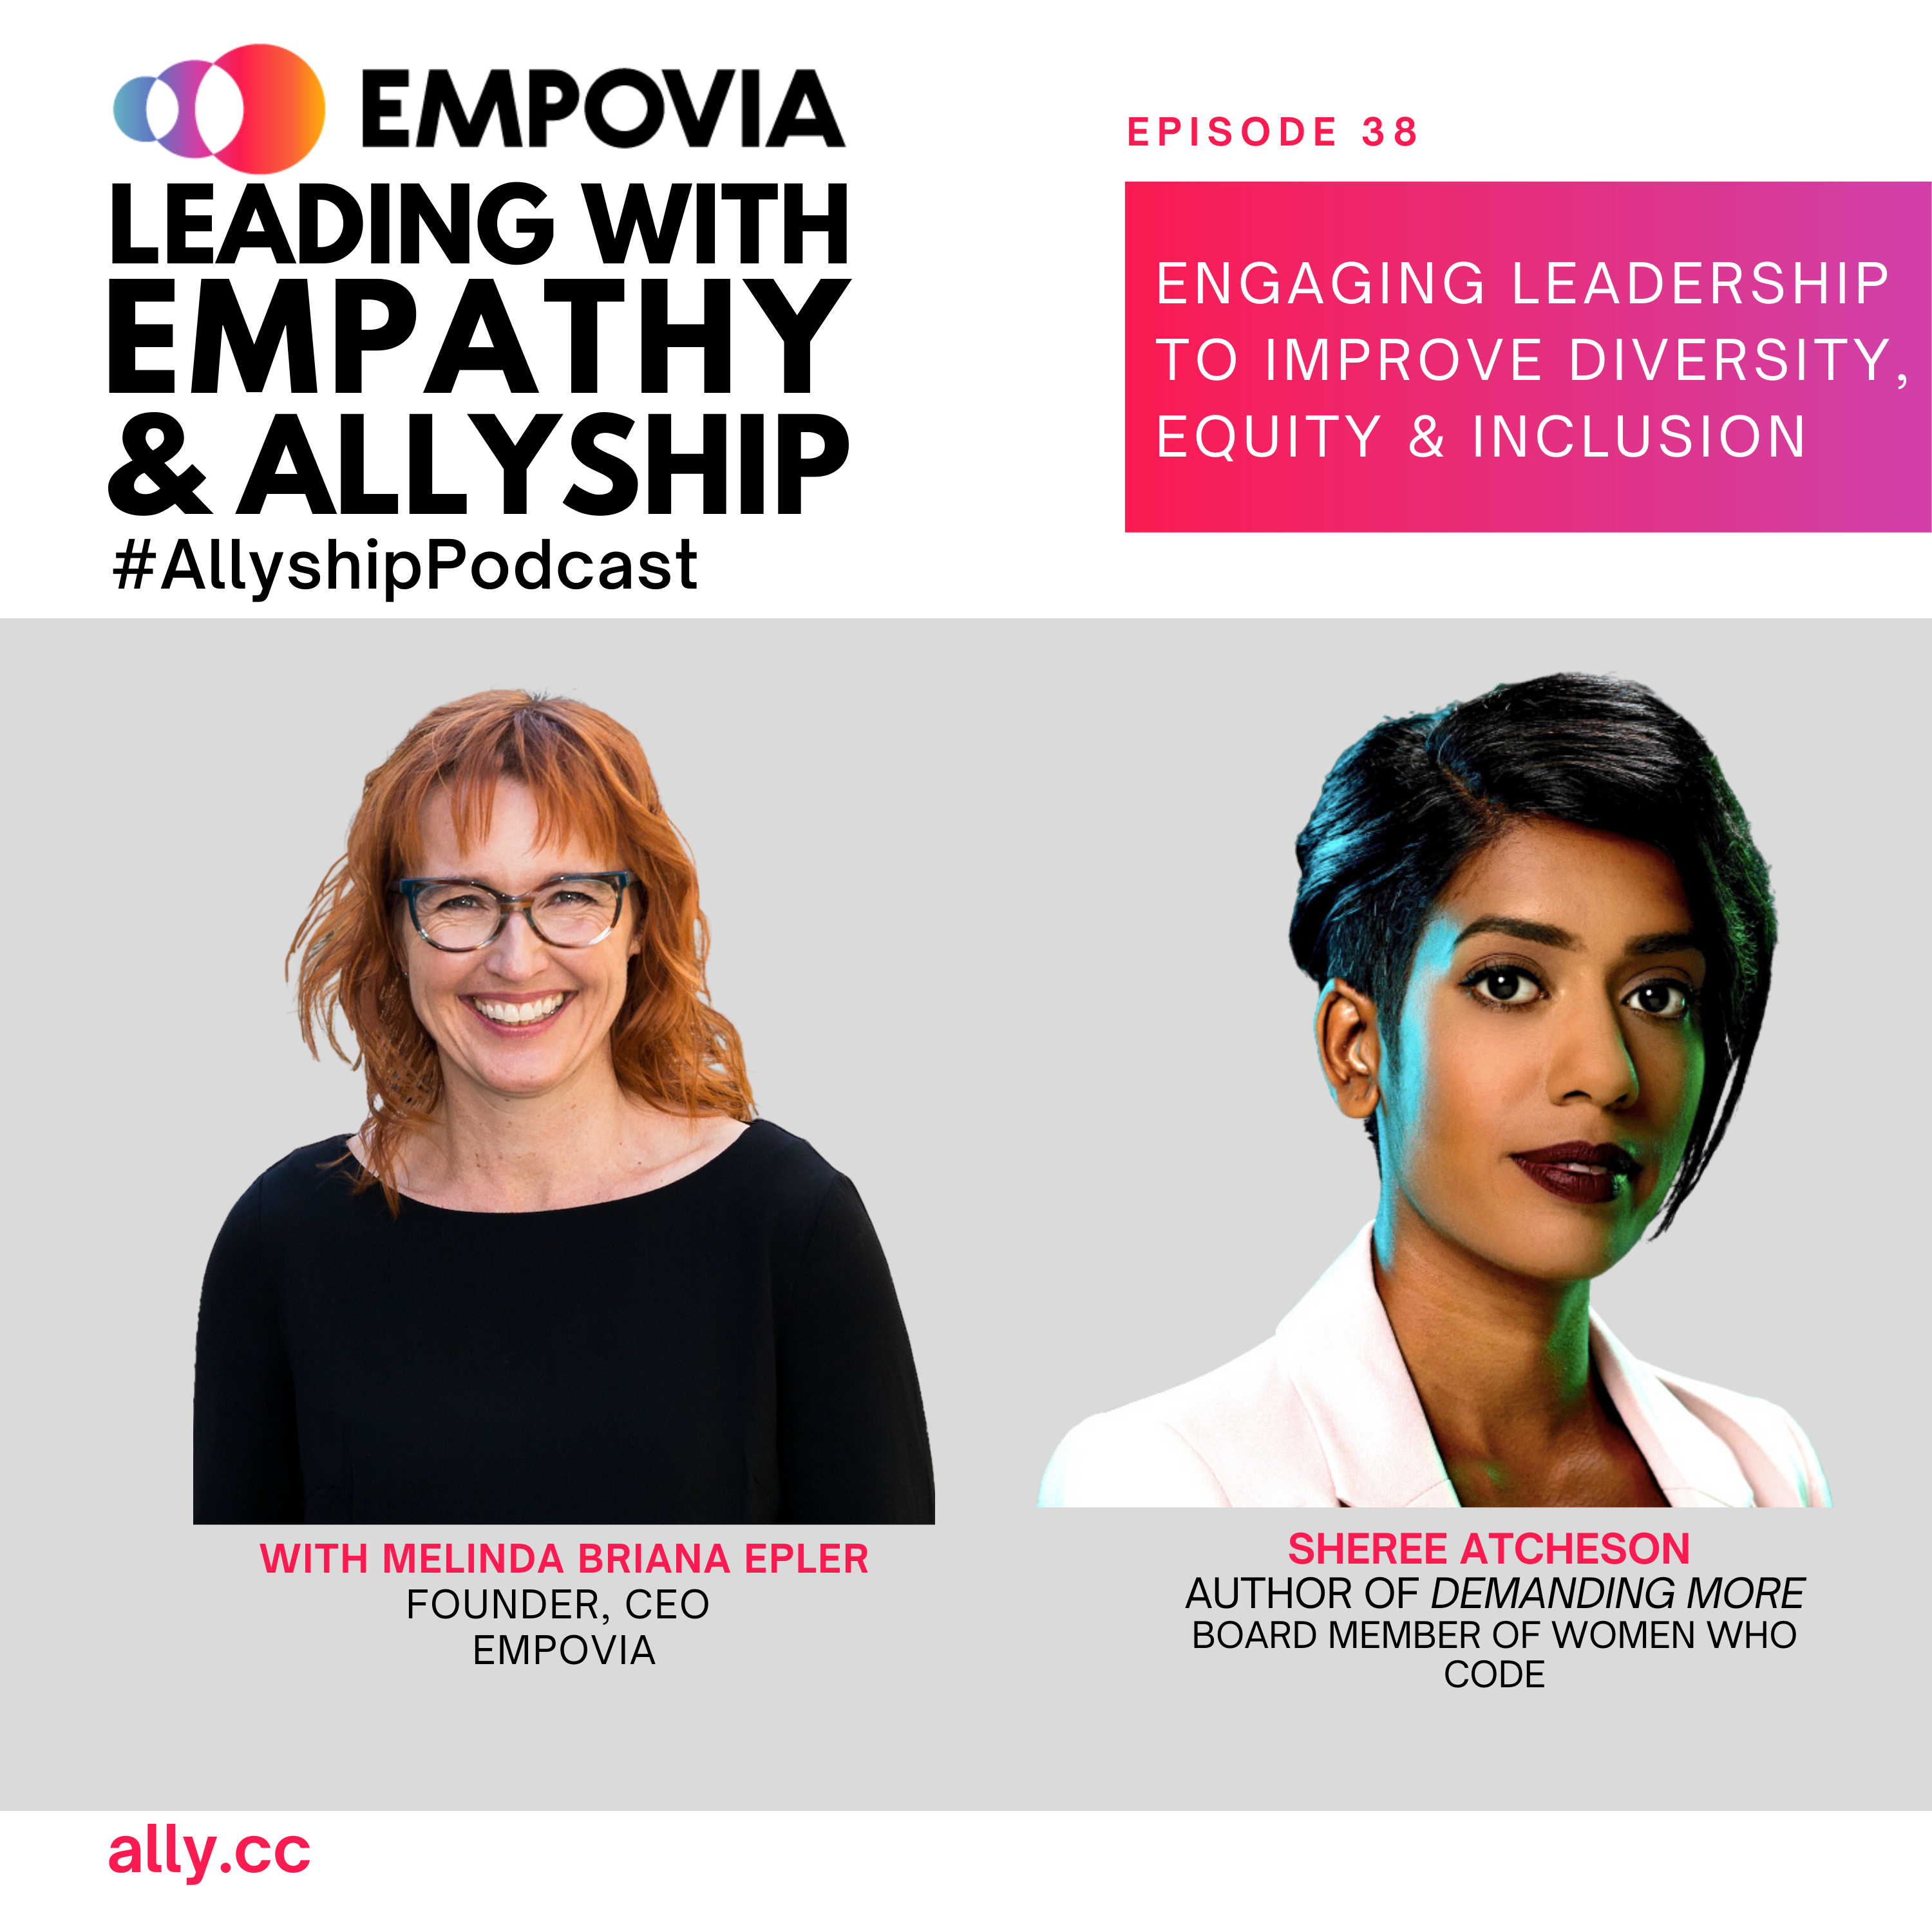 Leading With Empathy & Allyship promo with the Empovia logo and photos of host Melinda Briana Epler, a White woman with red hair and glasses, and Sheree Atcheson, a Sri Lankan woman with short black hair and white jacket.